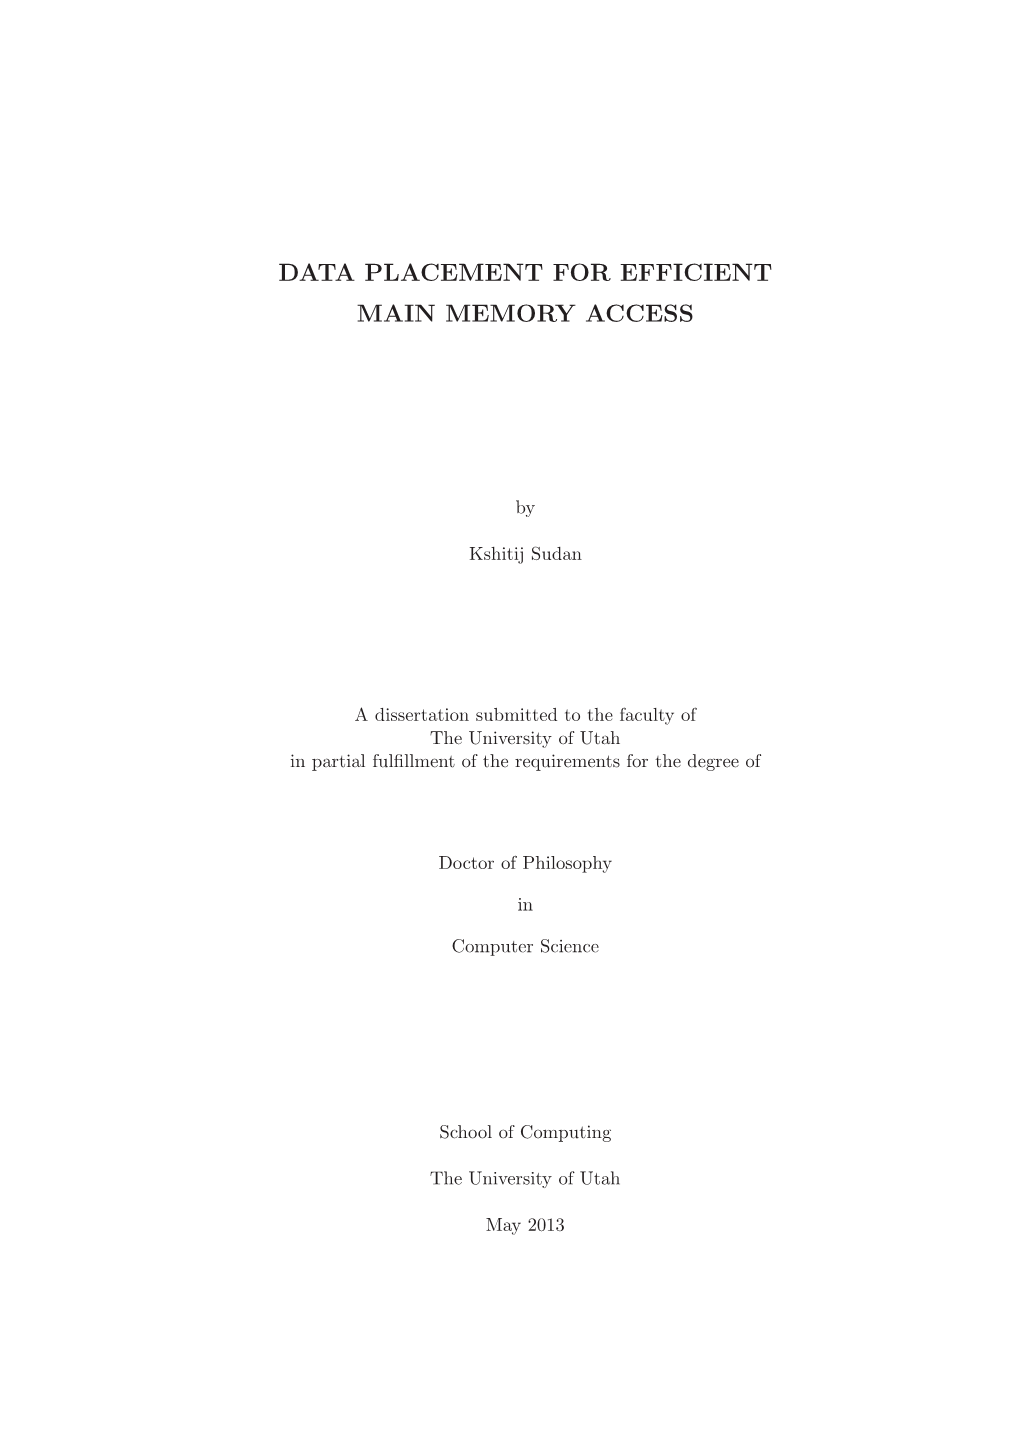 Data Placement for Efficient Main Memory Access